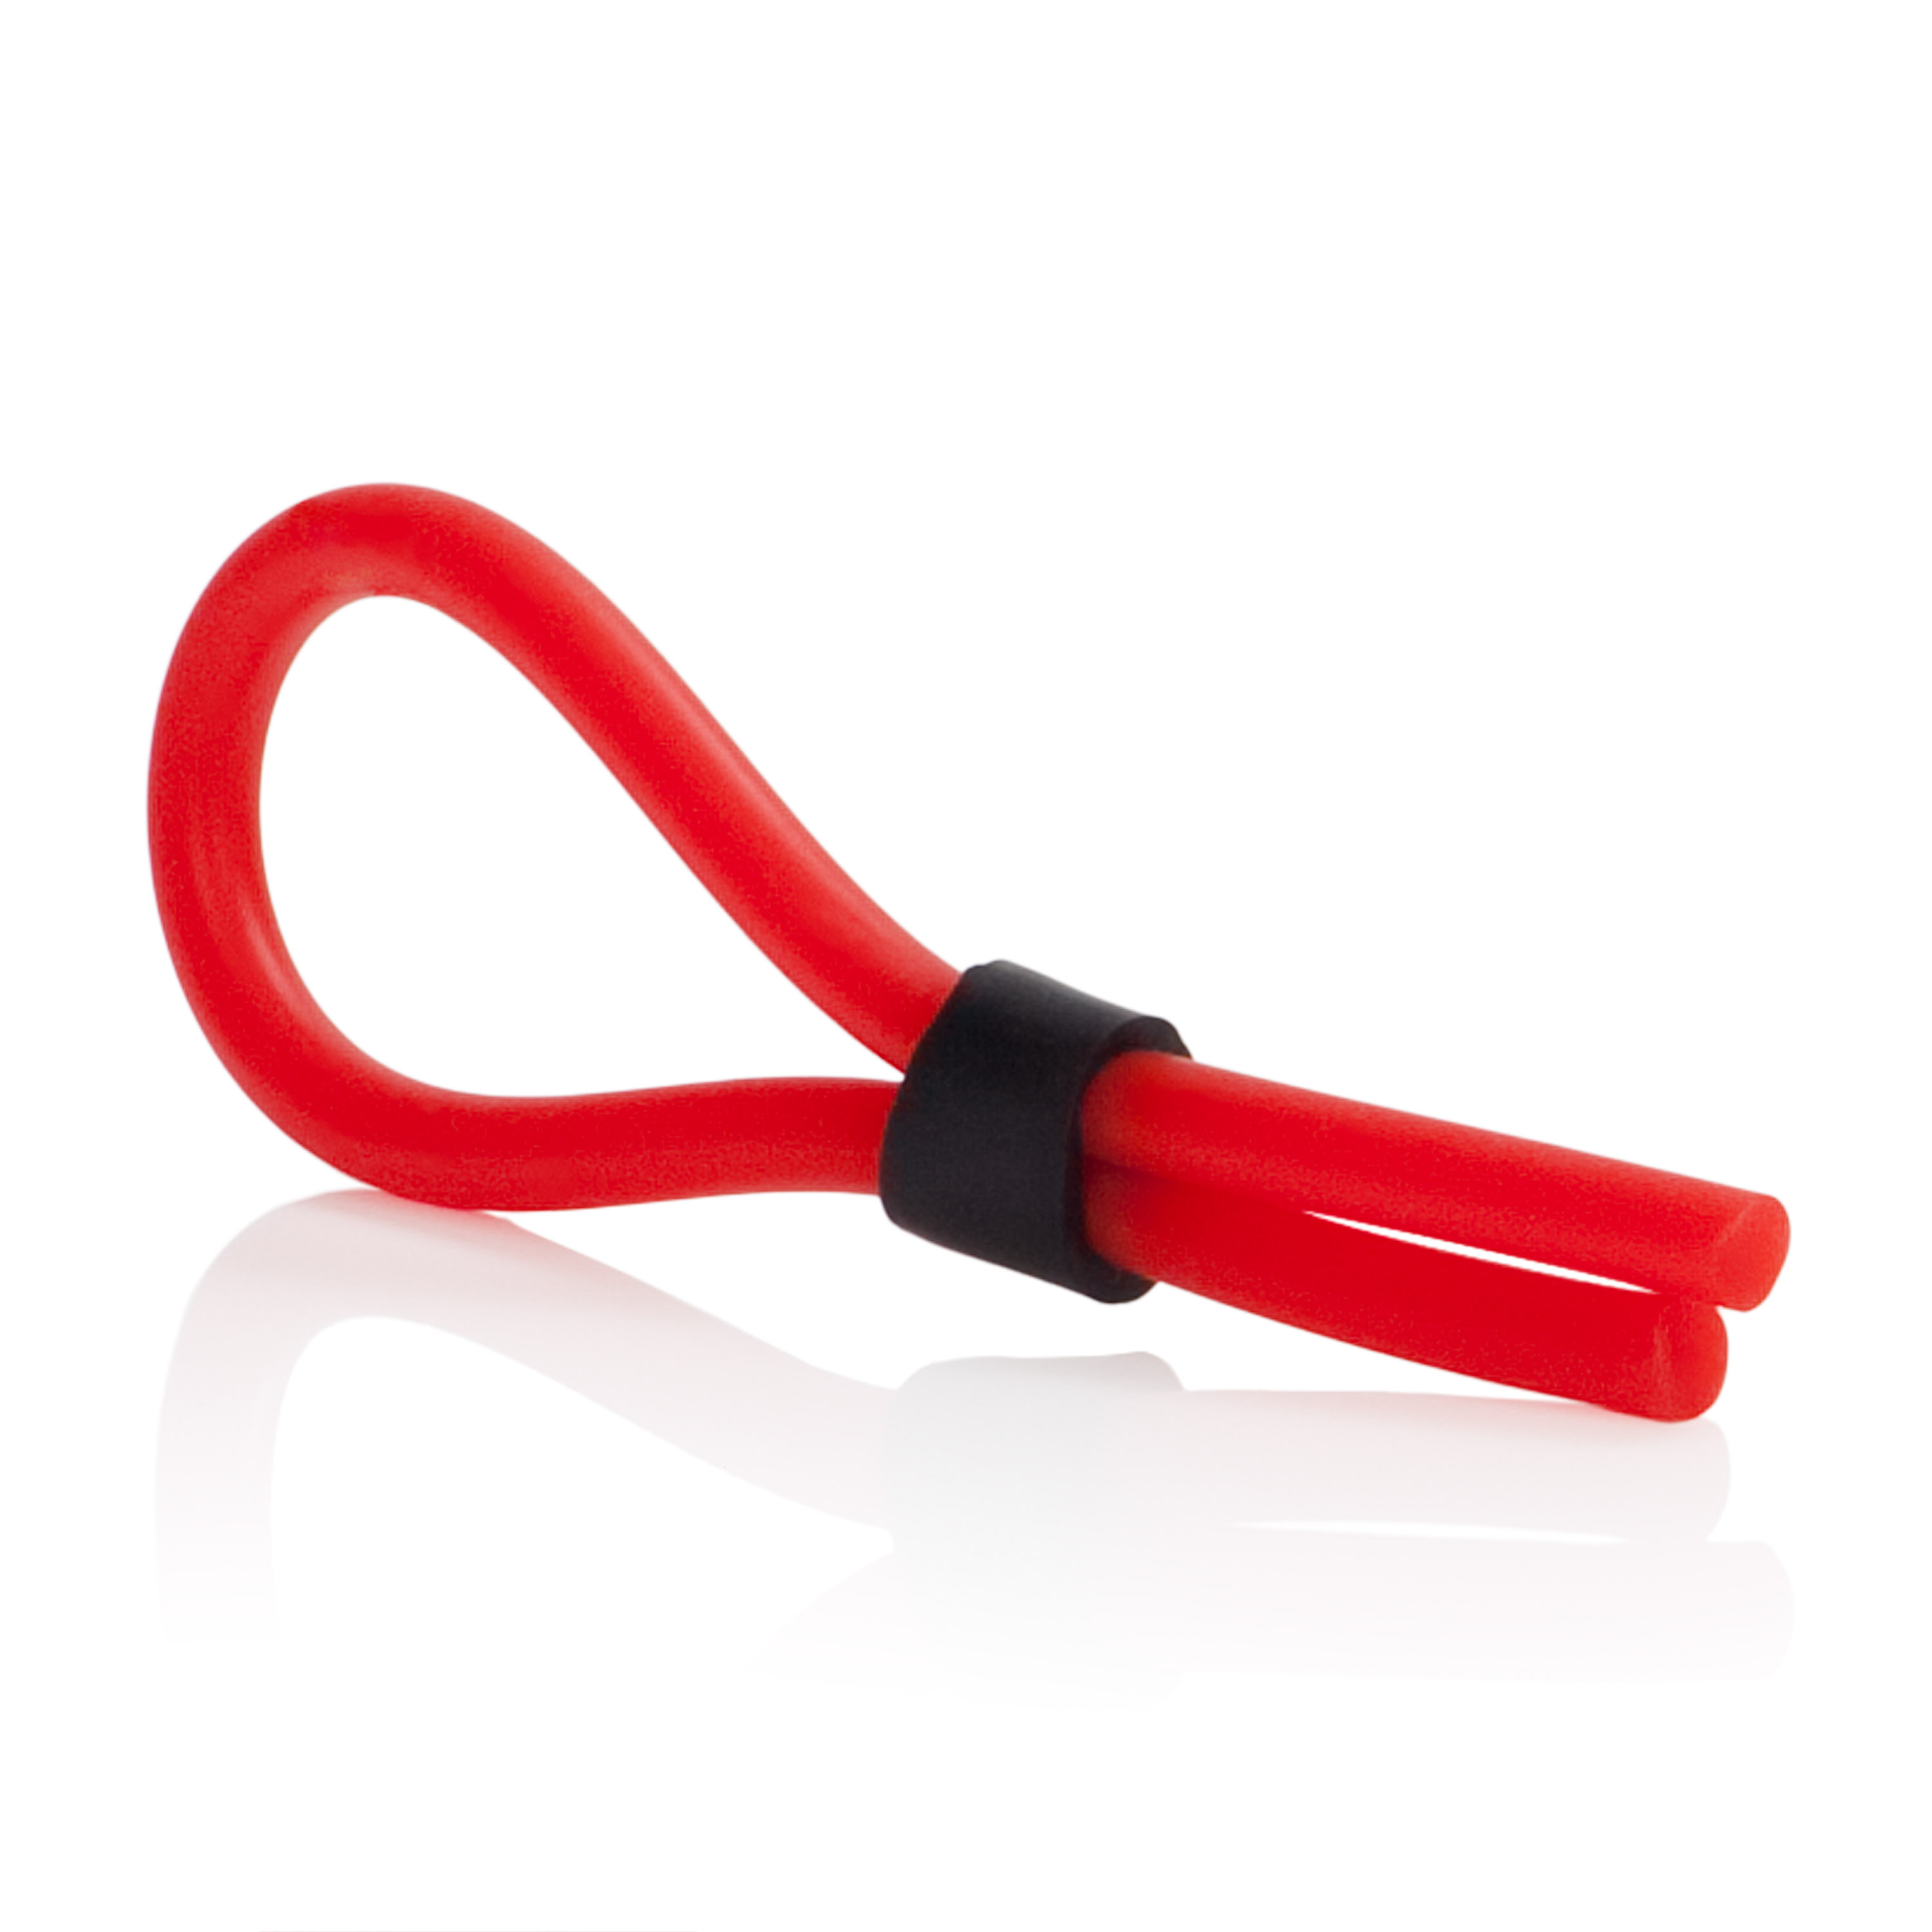 SE1408112 Silicone Stud Lasso - Red Honey's Place